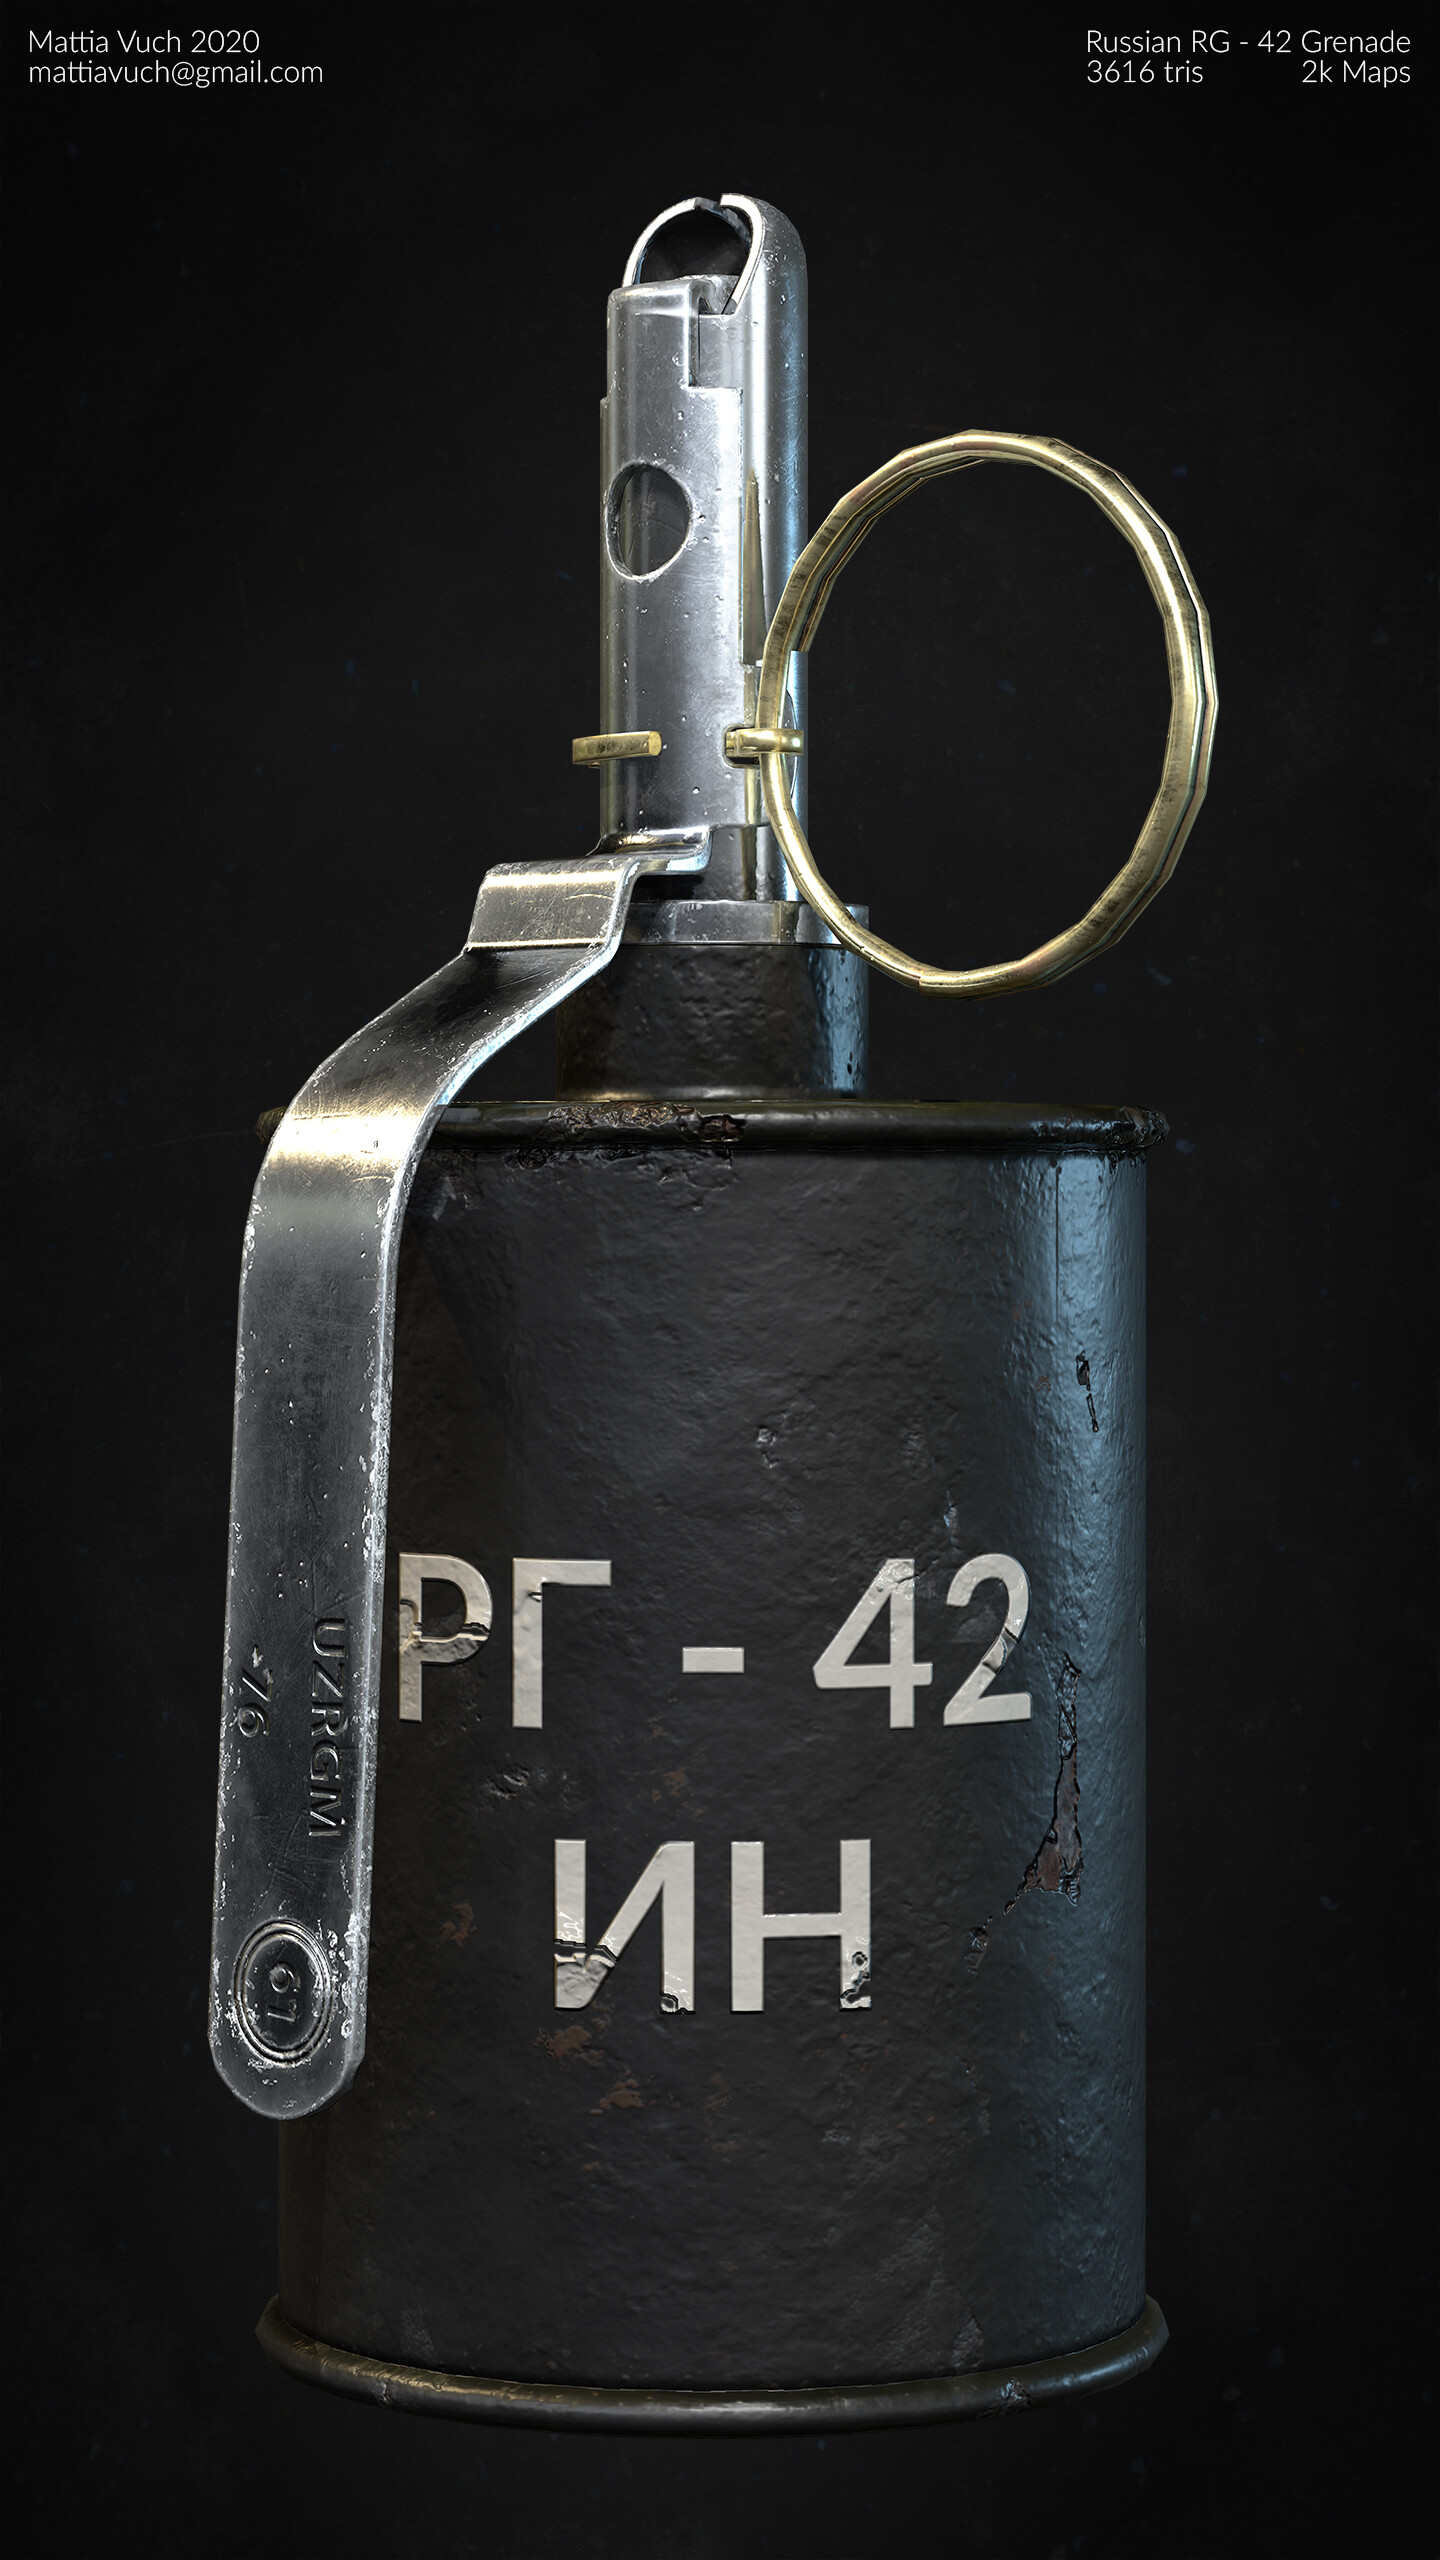 Soviet Russian Military Weapon Poster Print Handheld Grenades F-1 RG-42 RGD-5 